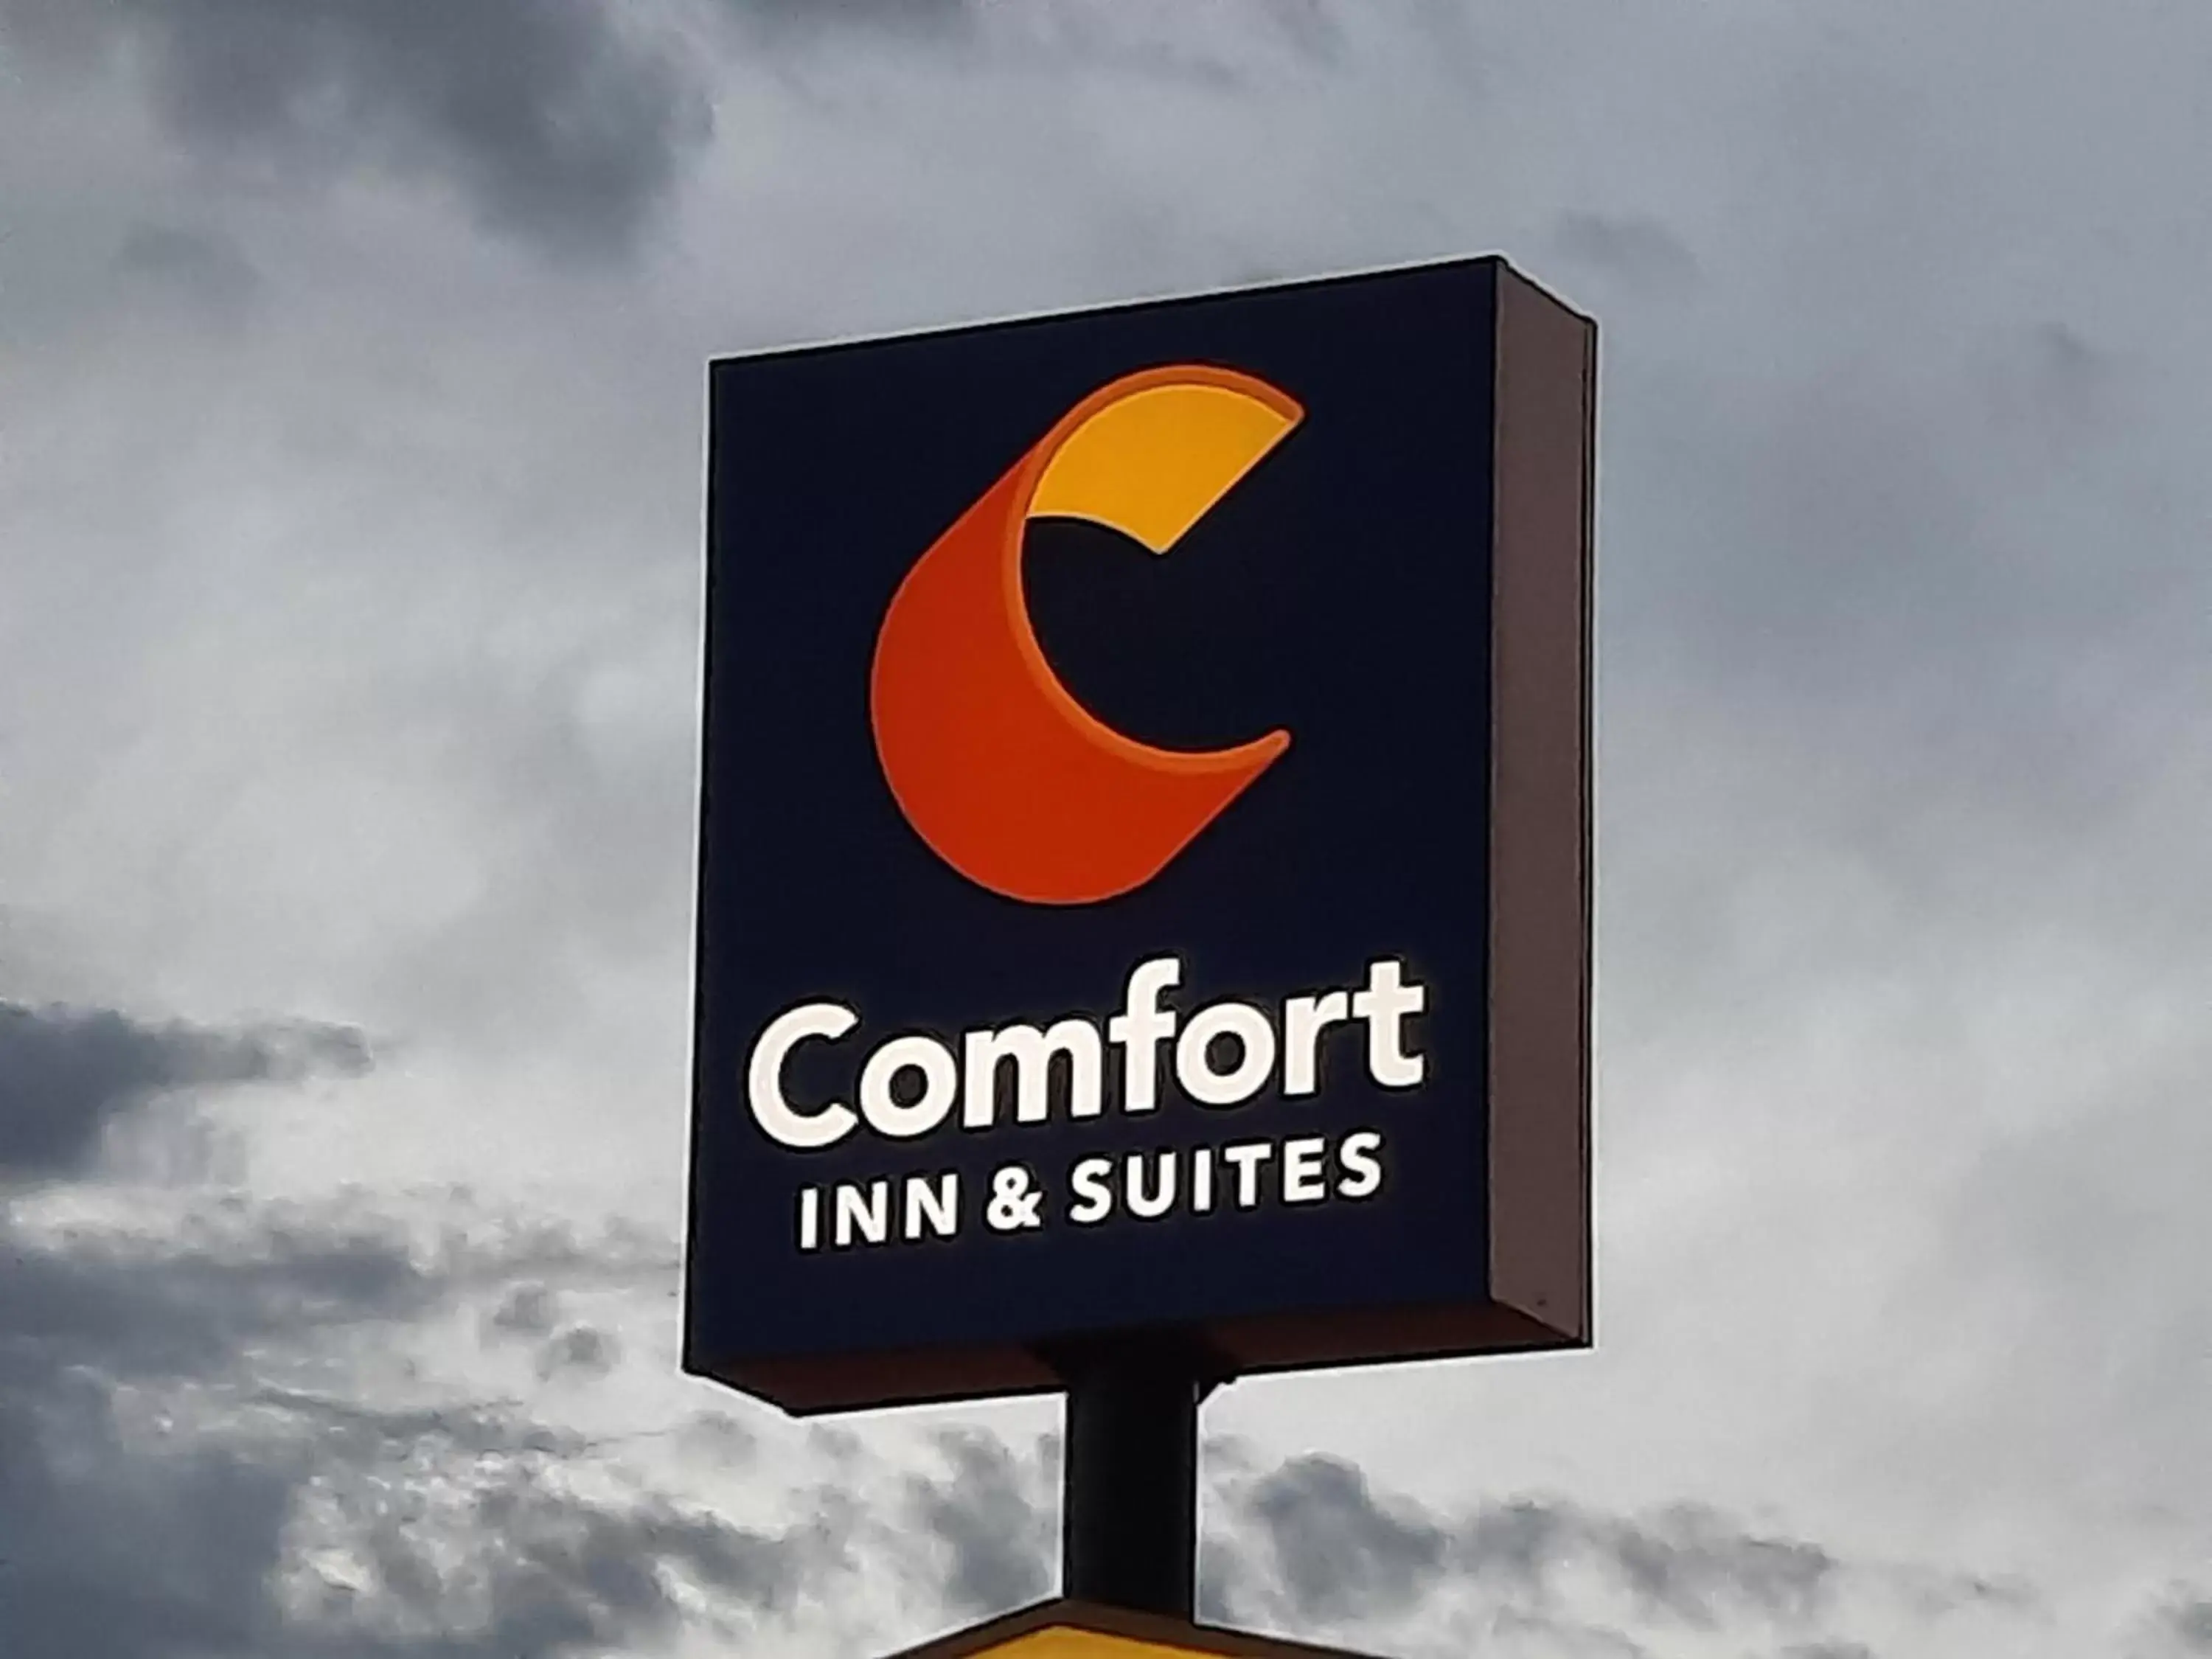 Property logo or sign in Comfort Inn & Suites I-25 near Spaceport America